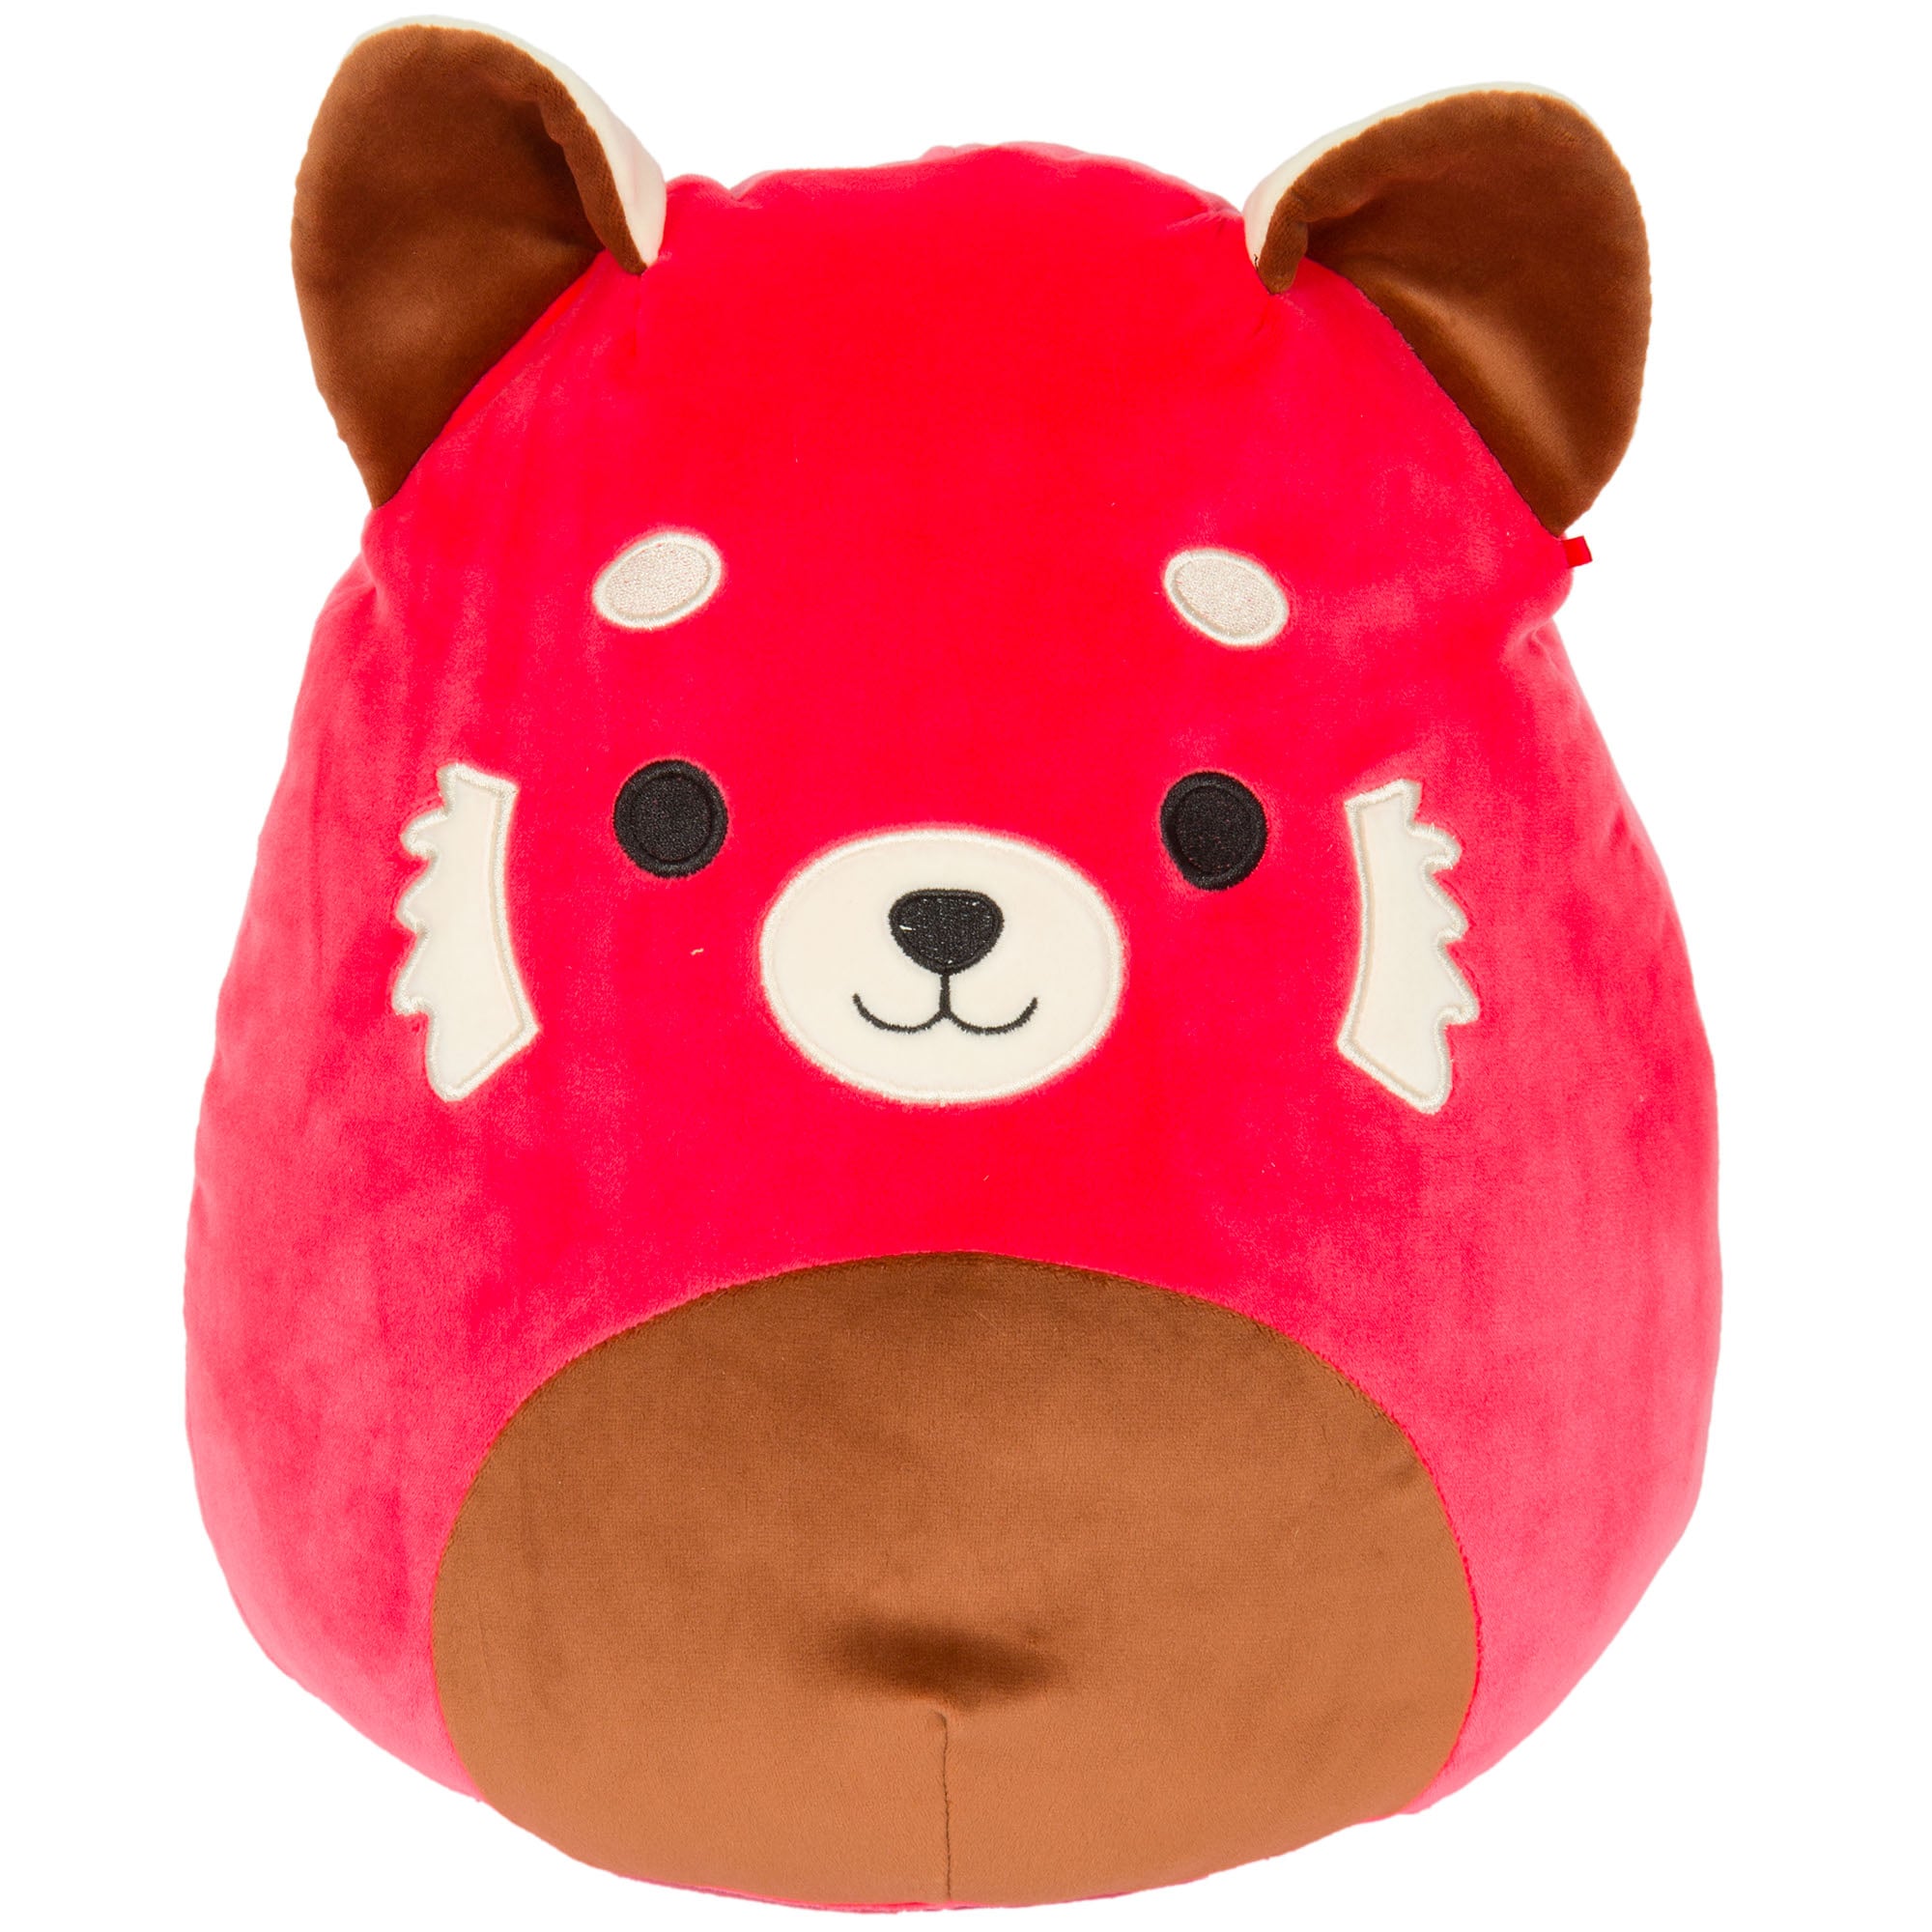 17” SQUISHMALLOW RED PANDA  NEW WITH TAGS RARE HARD TO FIND